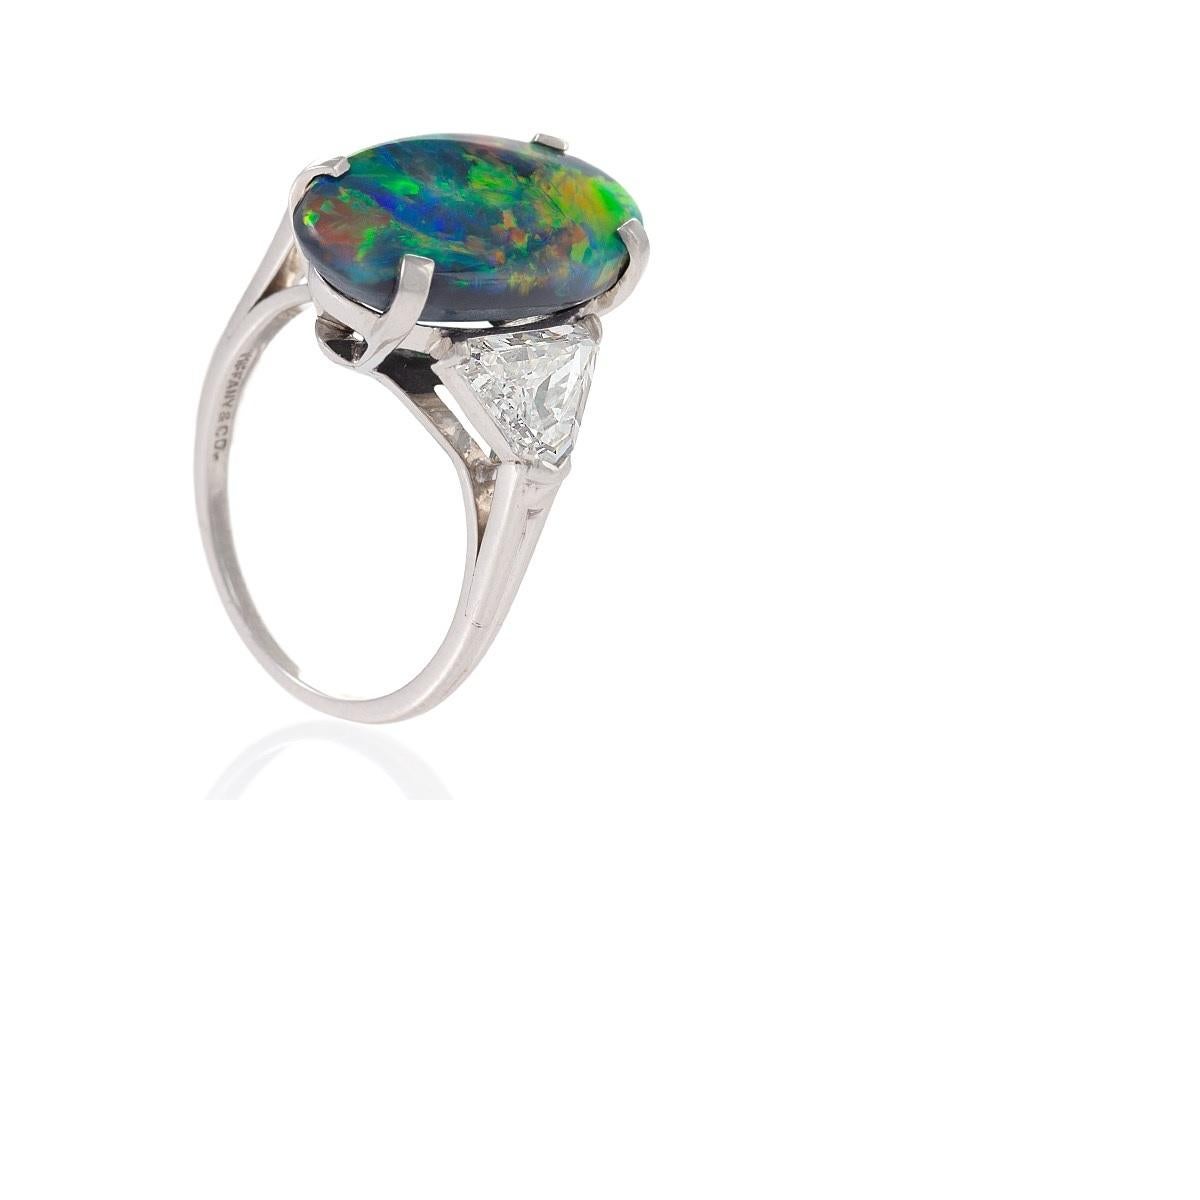 An American modern platinum ring with black opal and diamonds by Tiffany & Co. The ring is set with a cabochon black opal with an approximate total weight of 5.00 carats, flanked by shield-shaped diamonds with an approximate total weight of 1.40